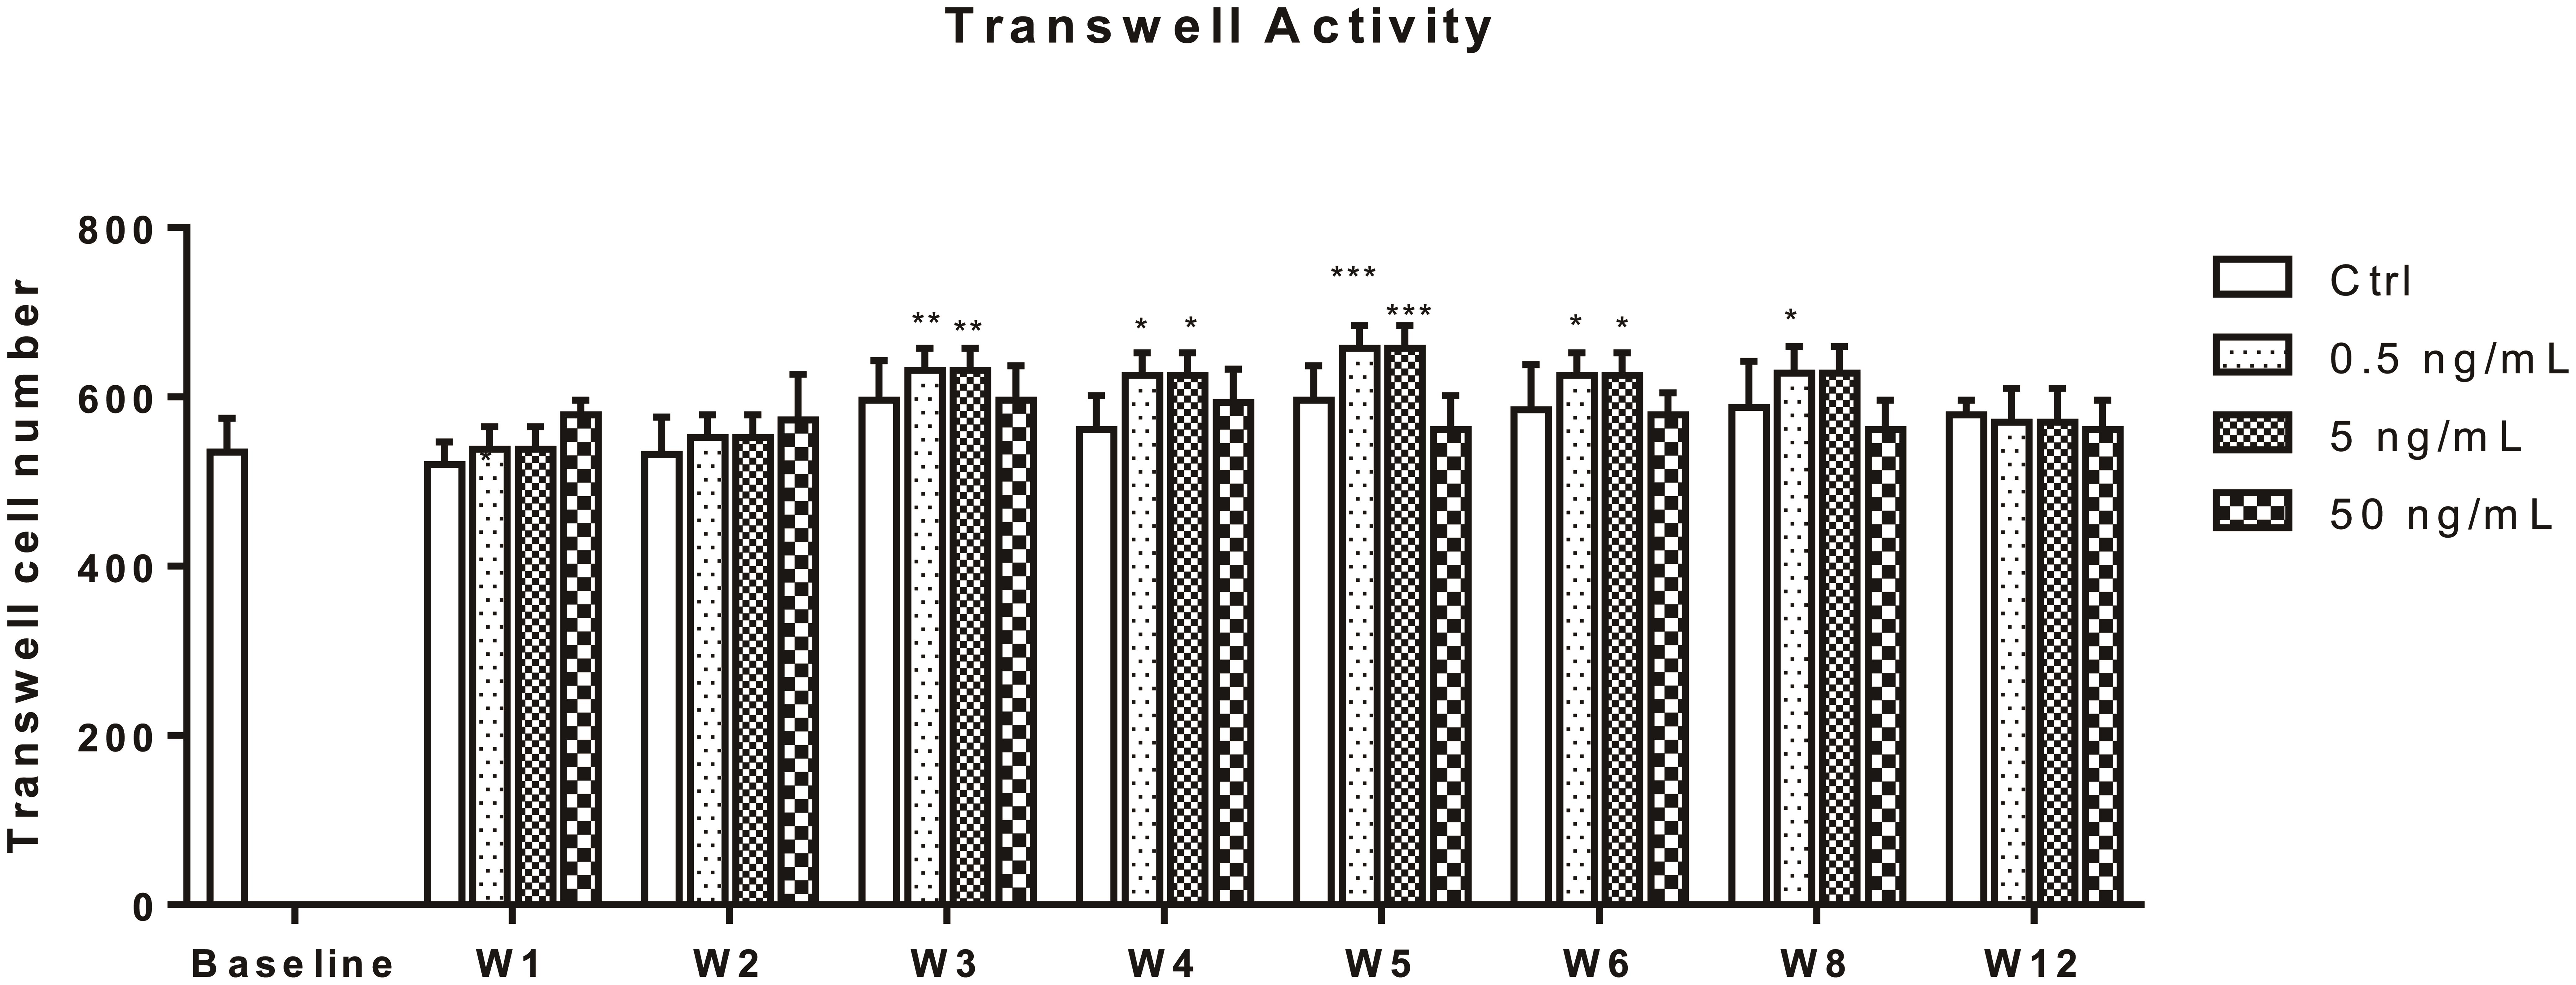 Effects of FGF19 exposure on H69 cholangiocyte invasion as determined by the Transwell cell invasion assay.